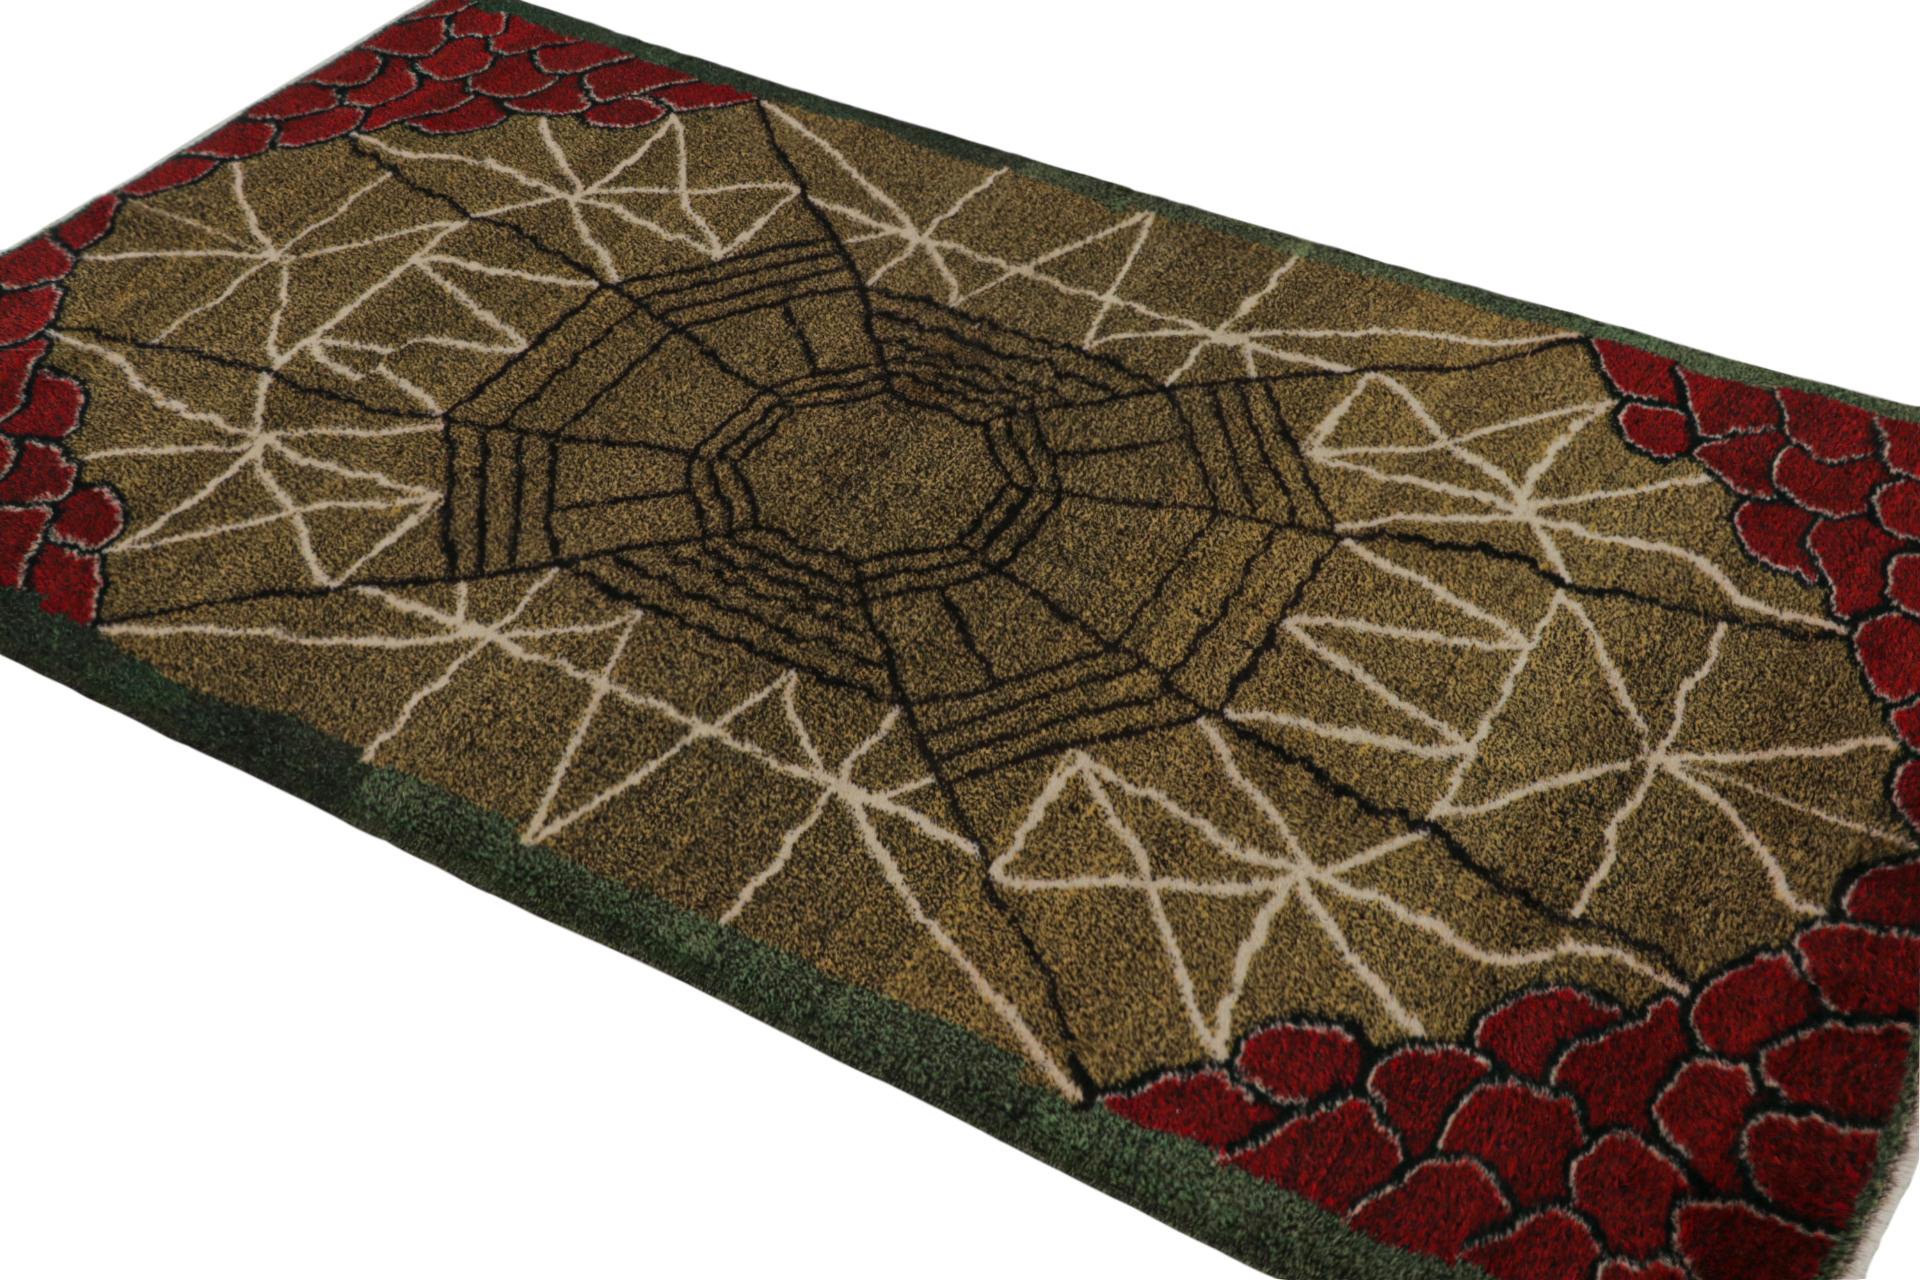 Hand-knotted in wool, circa 1960 – 1970, this 4×7 vintage Müren Art Deco rug is an exciting new addition to the Rug & Kilim Mid-century Pasha Collection. Its design, with a Scandinavian influence, is believed to be a rare work of Mid-Century atelier